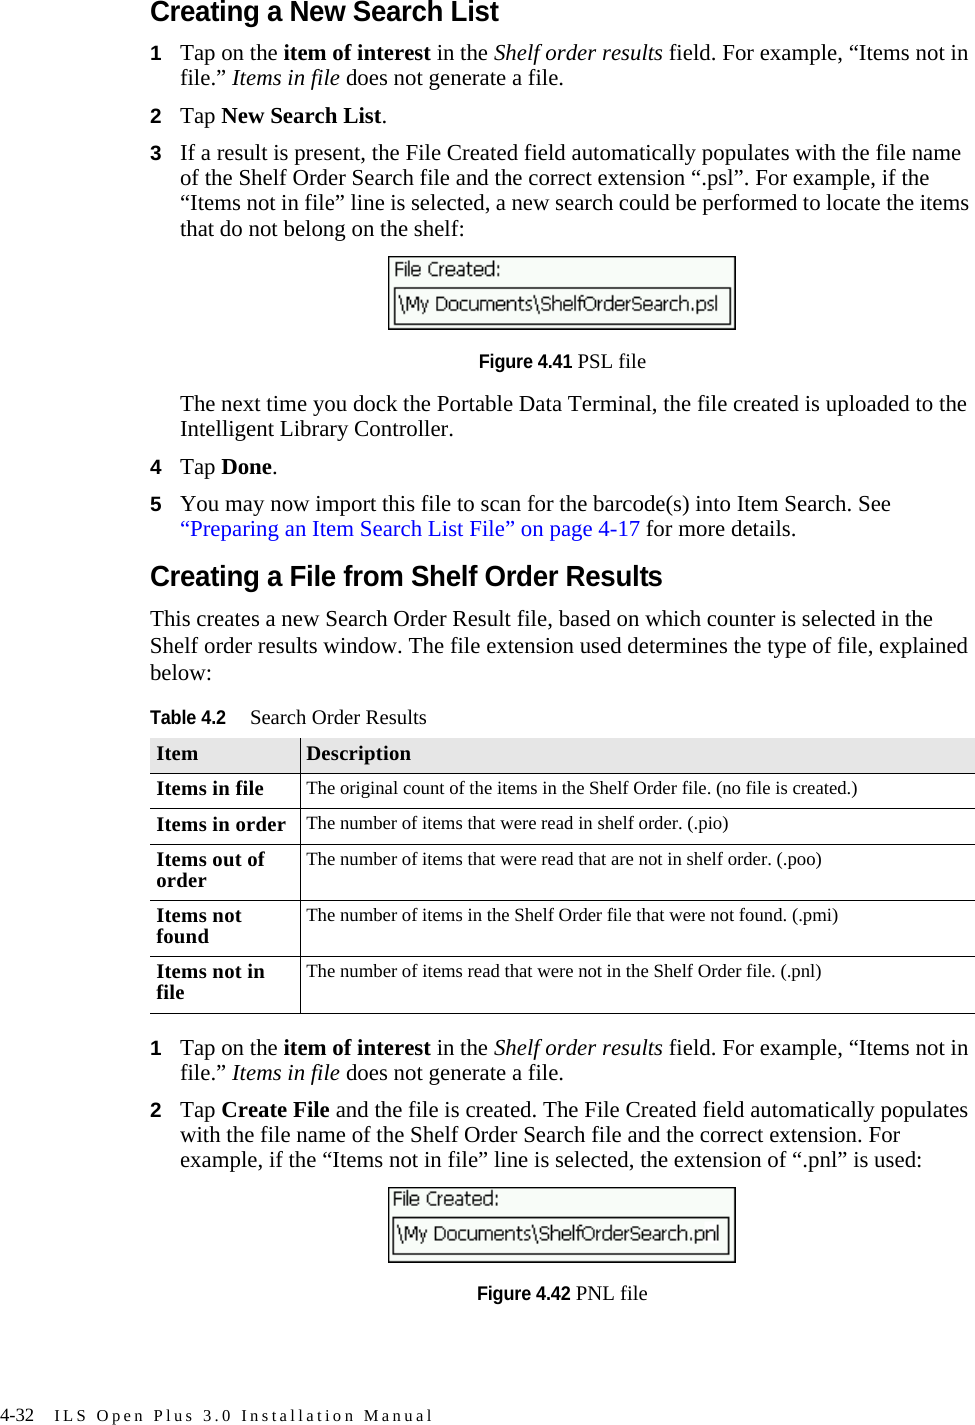 4-32 ILS Open Plus 3.0 Installation ManualCreating a New Search List1Tap on the item of interest in the Shelf order results field. For example, “Items not in file.” Items in file does not generate a file.2Tap New Search List.3If a result is present, the File Created field automatically populates with the file name of the Shelf Order Search file and the correct extension “.psl”. For example, if the “Items not in file” line is selected, a new search could be performed to locate the items that do not belong on the shelf: Figure 4.41 PSL fileThe next time you dock the Portable Data Terminal, the file created is uploaded to the Intelligent Library Controller.4Tap Done.5You may now import this file to scan for the barcode(s) into Item Search. See “Preparing an Item Search List File” on page 4-17 for more details.Creating a File from Shelf Order ResultsThis creates a new Search Order Result file, based on which counter is selected in the Shelf order results window. The file extension used determines the type of file, explained below:1Tap on the item of interest in the Shelf order results field. For example, “Items not in file.” Items in file does not generate a file.2Tap Create File and the file is created. The File Created field automatically populates with the file name of the Shelf Order Search file and the correct extension. For example, if the “Items not in file” line is selected, the extension of “.pnl” is used: Figure 4.42 PNL fileTable 4.2Search Order ResultsItem DescriptionItems in file The original count of the items in the Shelf Order file. (no file is created.)Items in order The number of items that were read in shelf order. (.pio)Items out of order The number of items that were read that are not in shelf order. (.poo)Items not found The number of items in the Shelf Order file that were not found. (.pmi)Items not in file The number of items read that were not in the Shelf Order file. (.pnl)